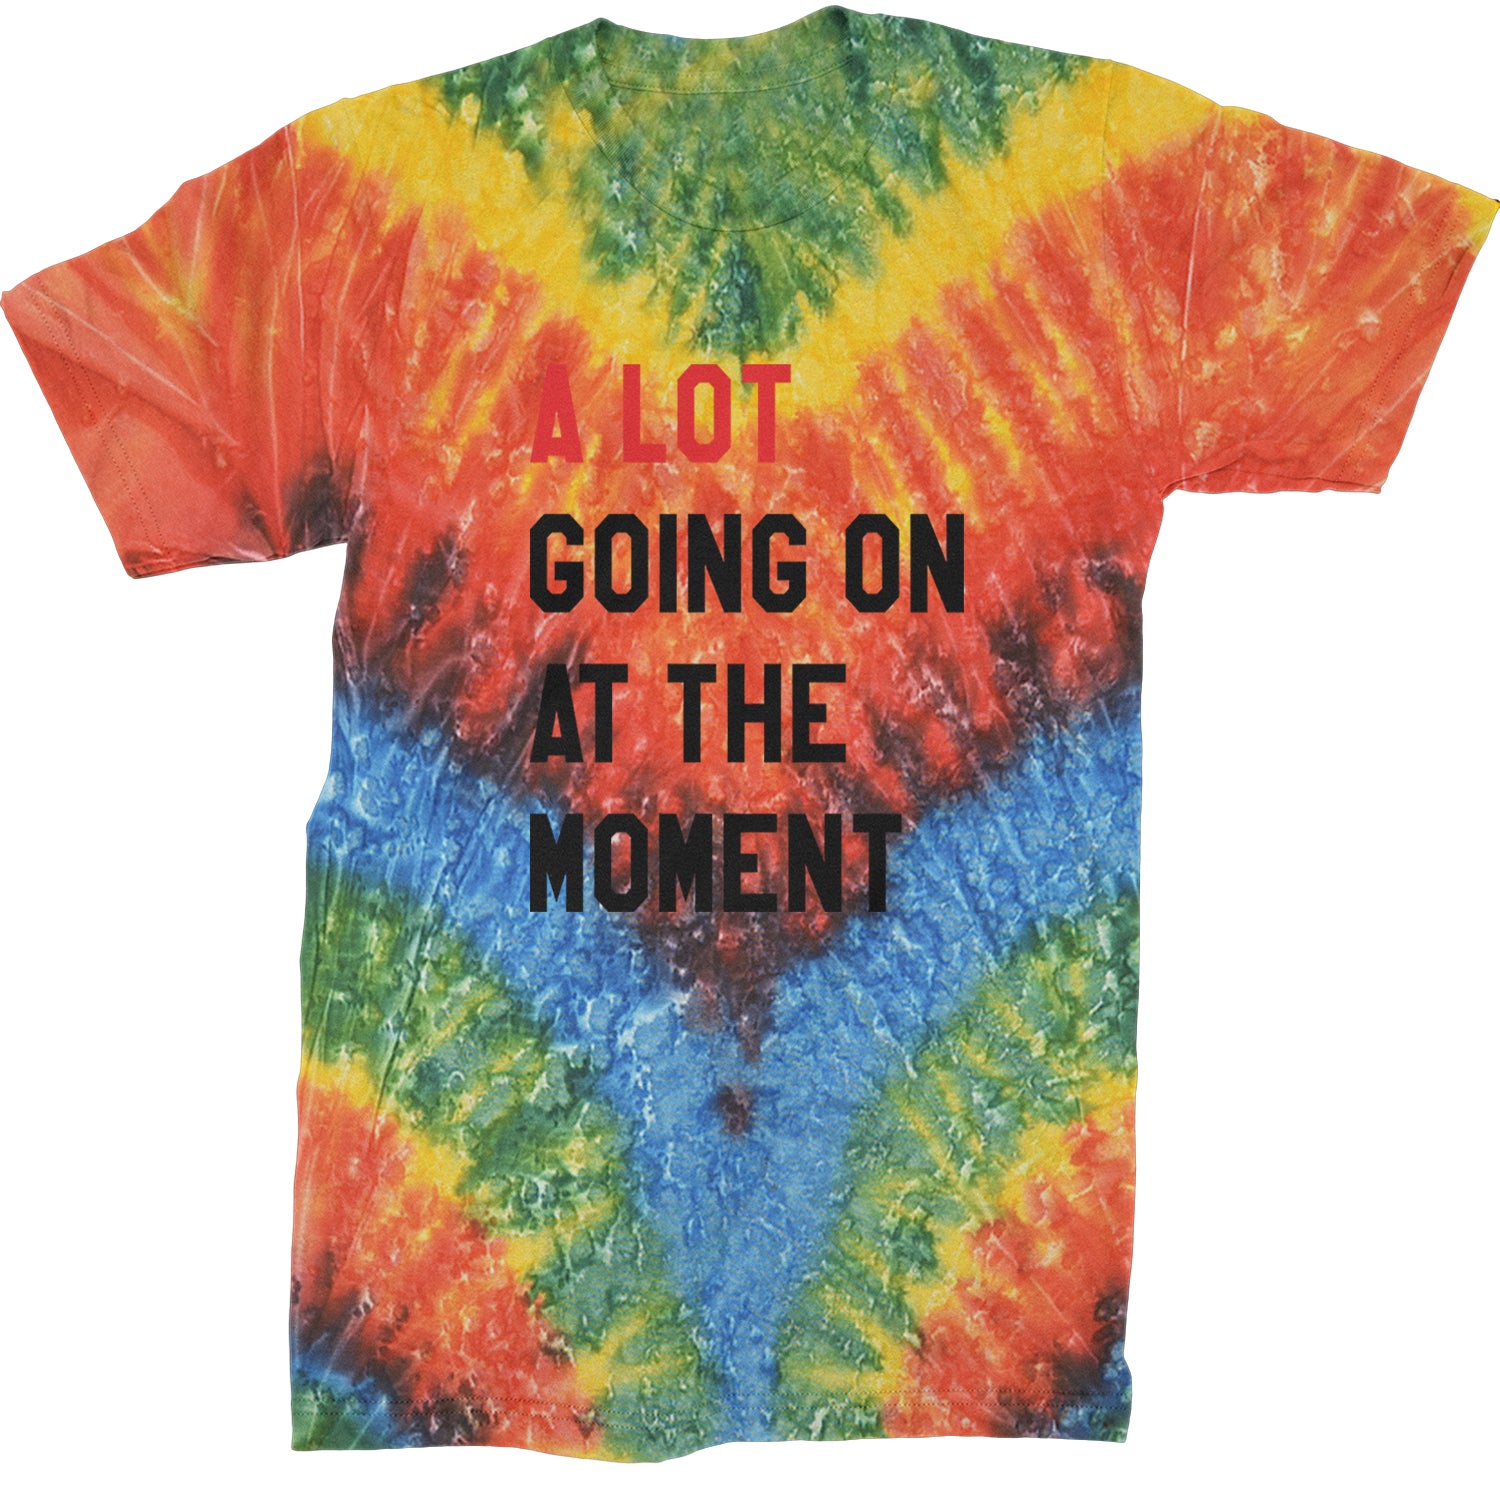 A Lot Going On At The Moment New TTPD Poet Department Mens T-shirt Tie-Dye Woodstock